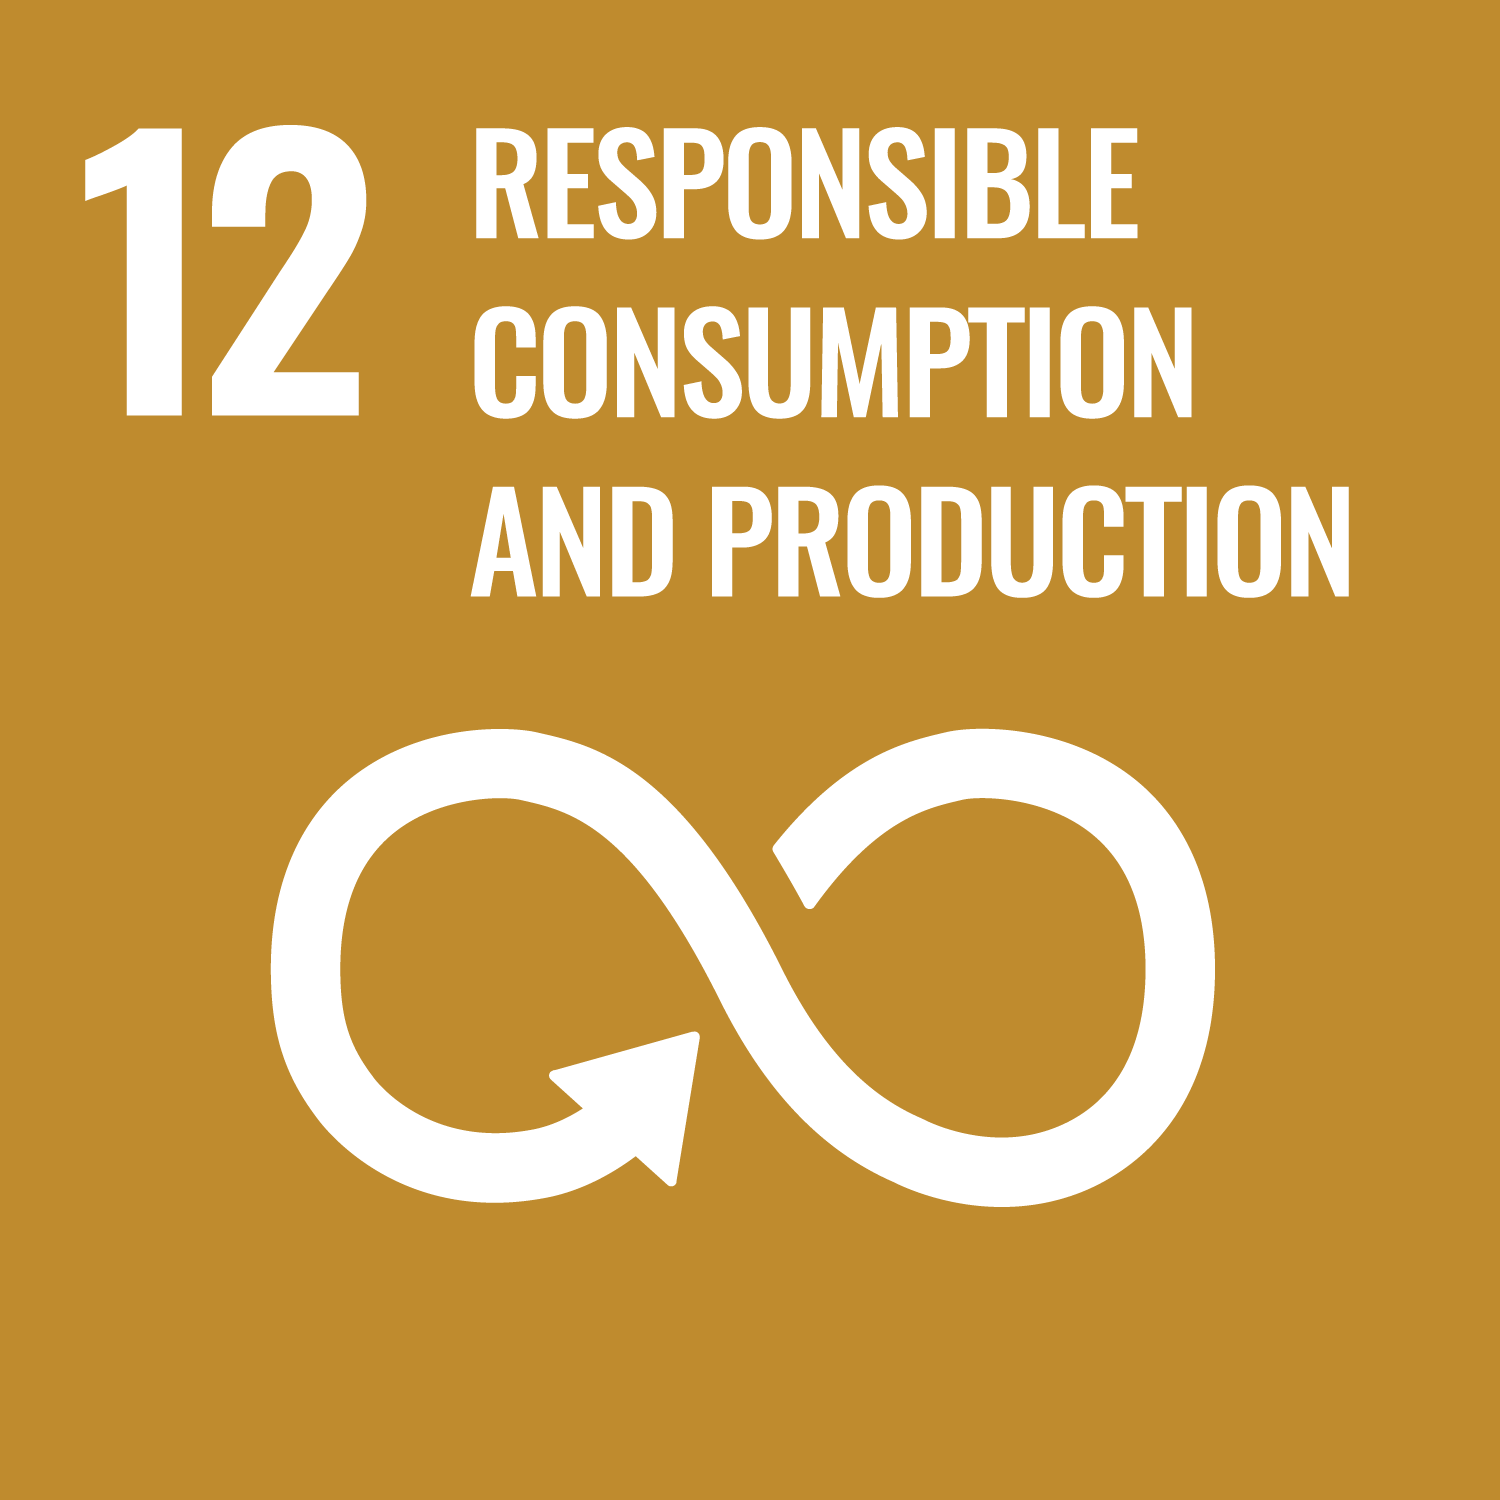 SDG 12, responsible consumption and production